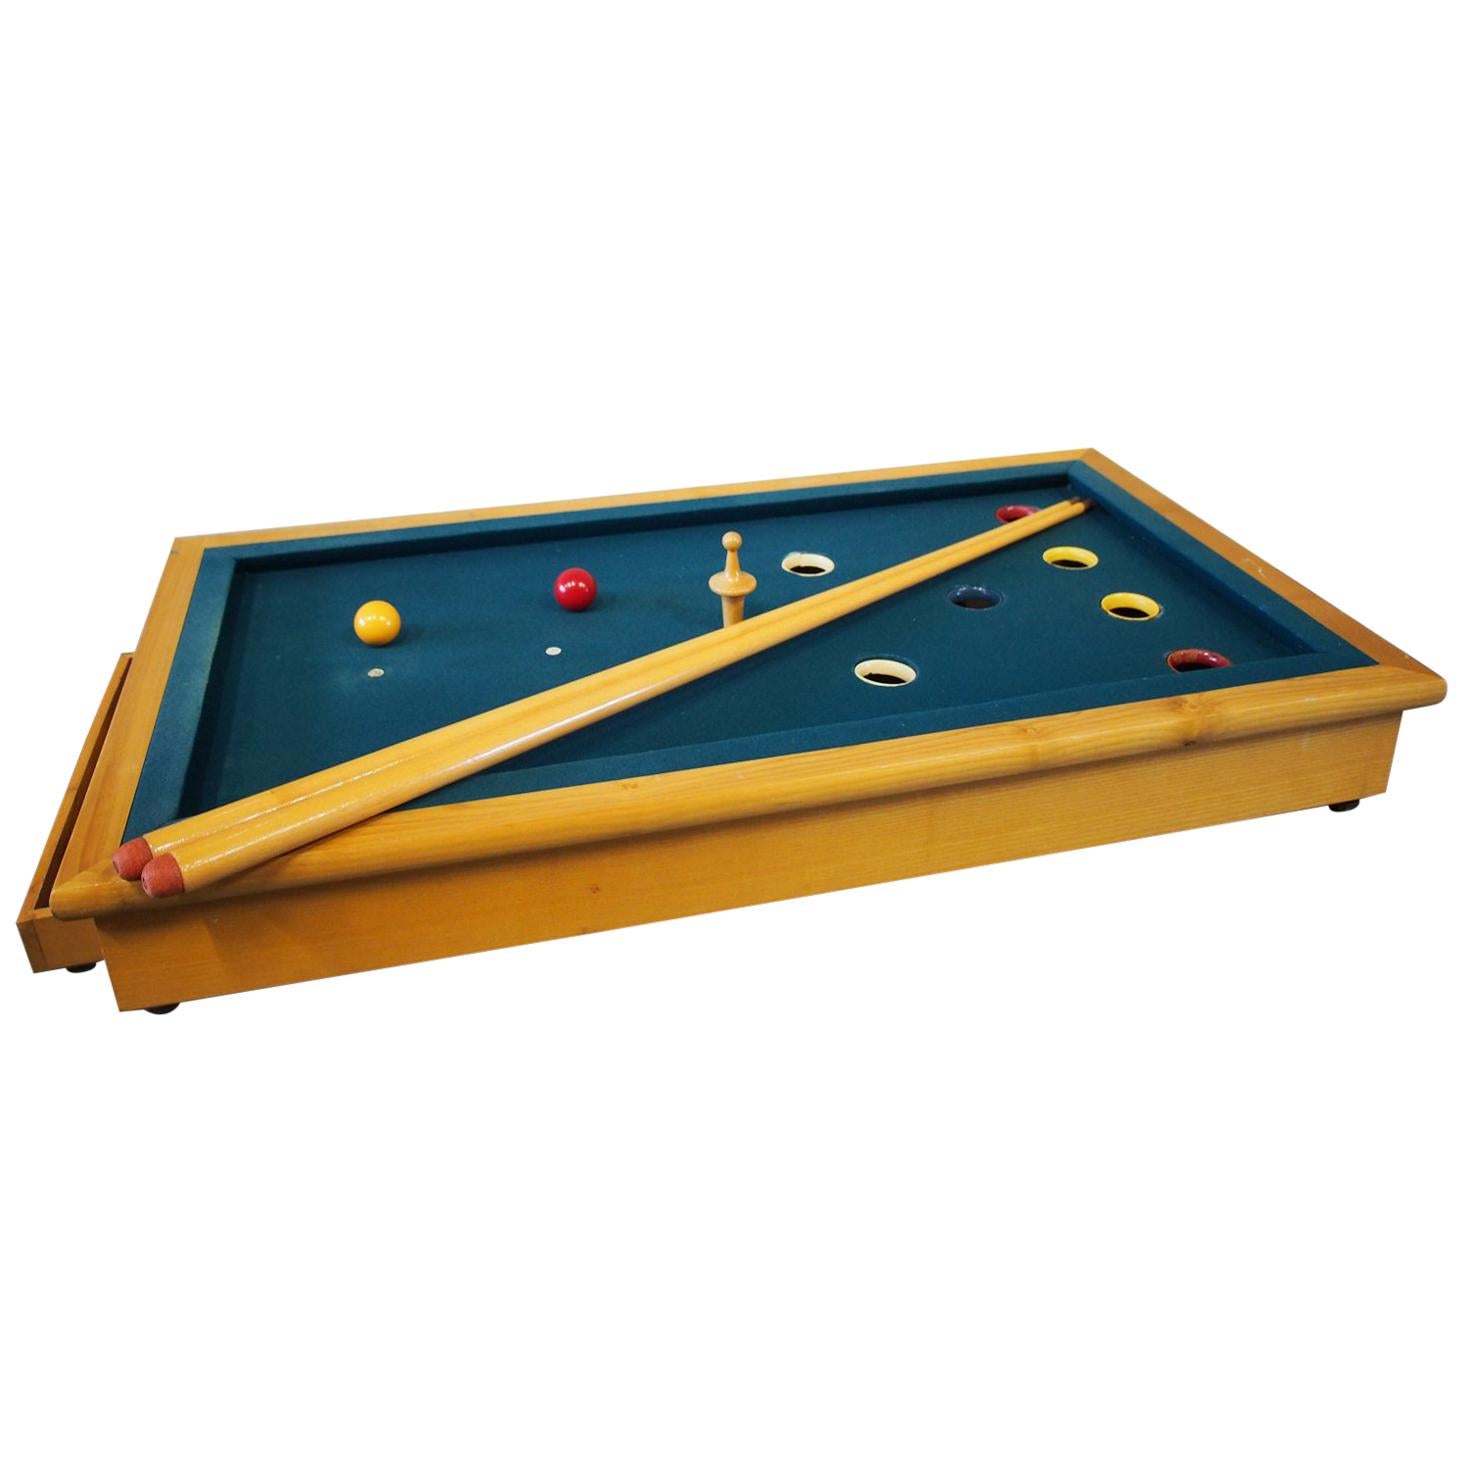 Small Table Poolgame with 2 Billiard Cues from the 1950s